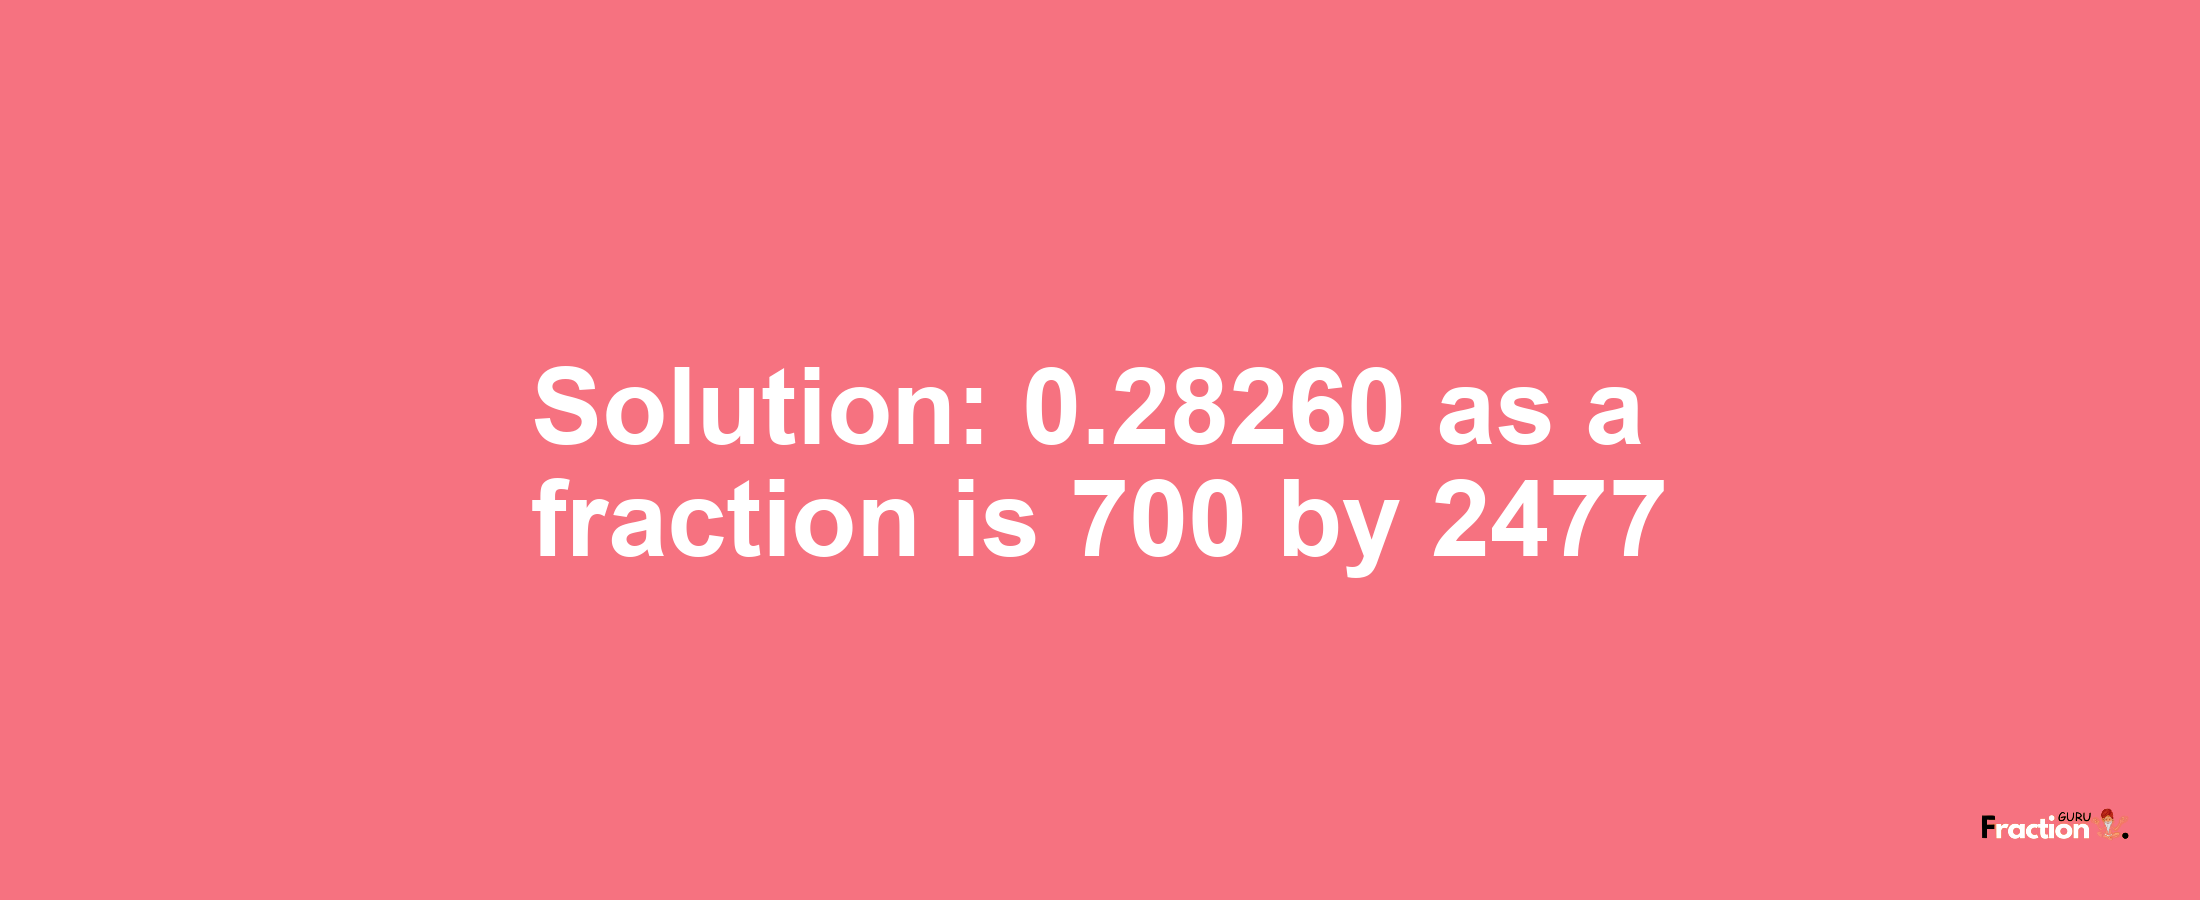 Solution:0.28260 as a fraction is 700/2477